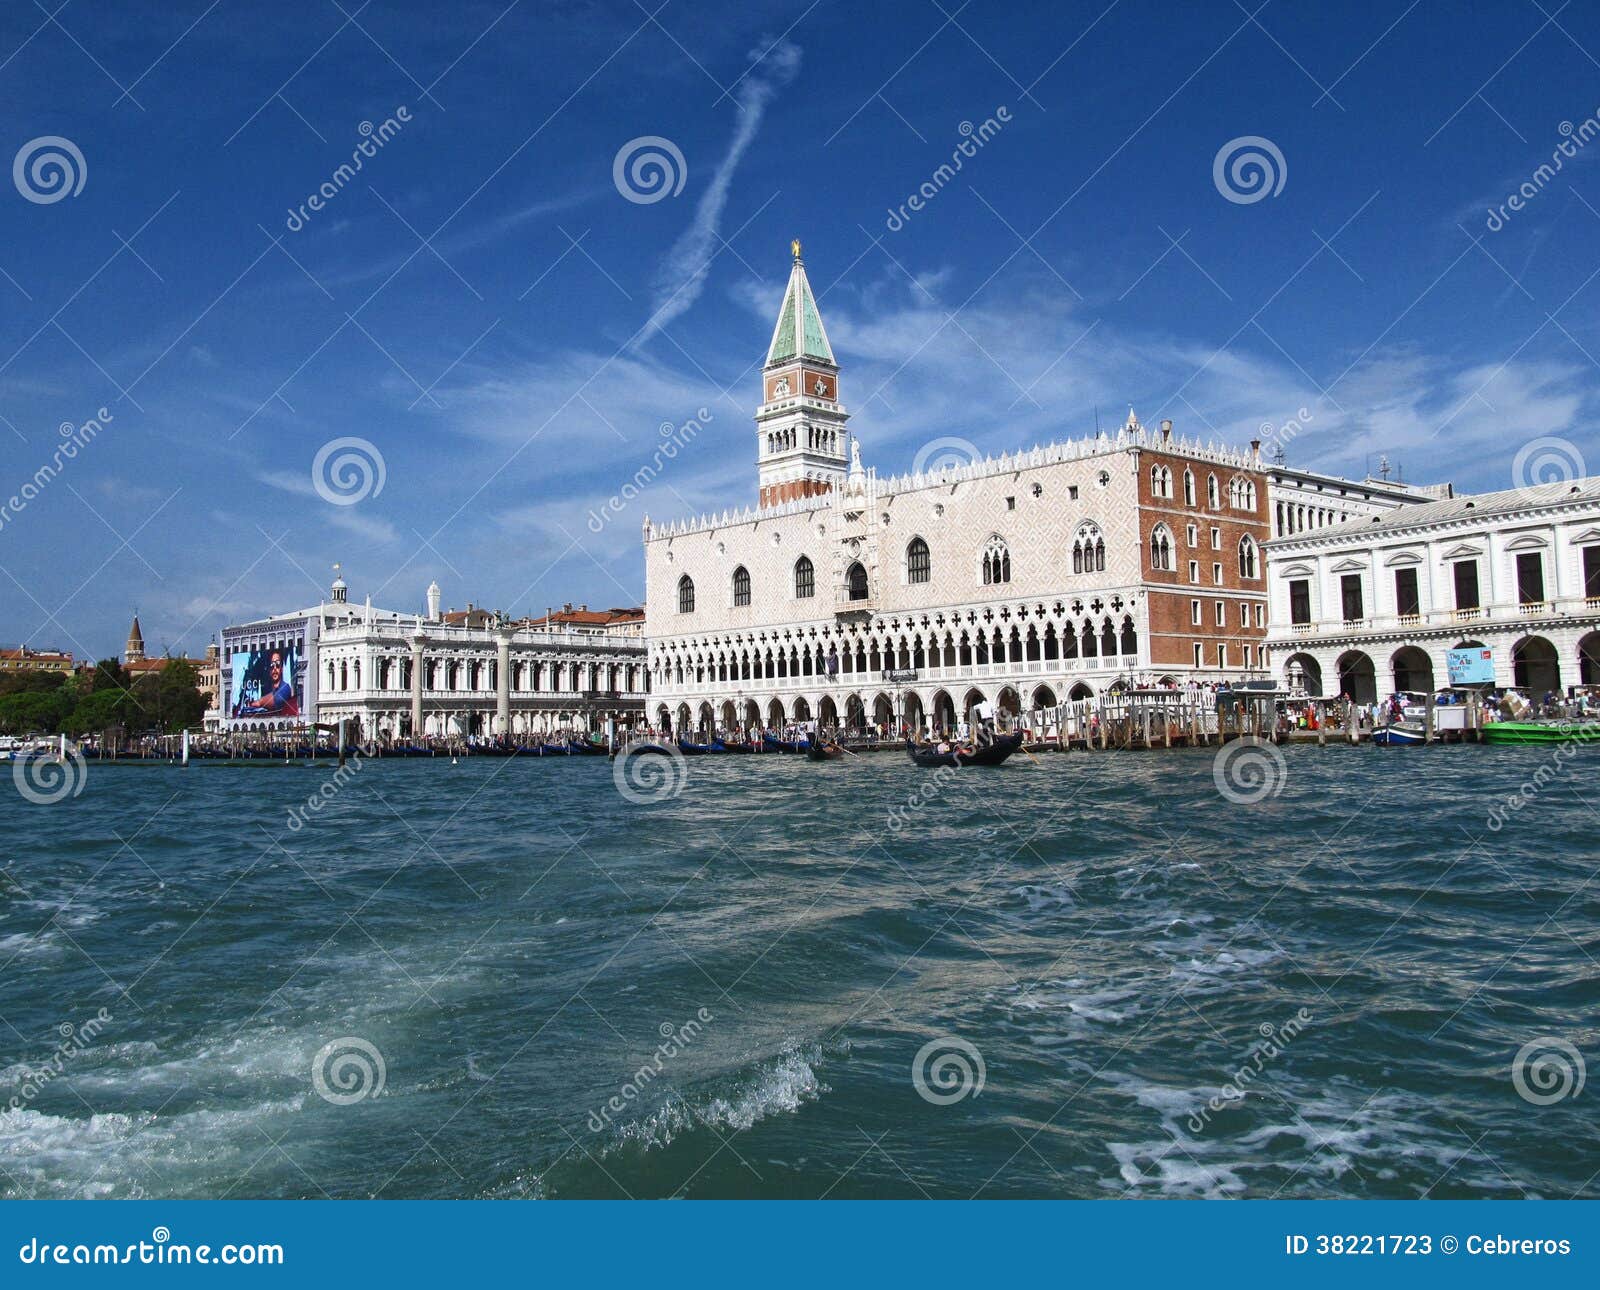 venice: a church at a channel